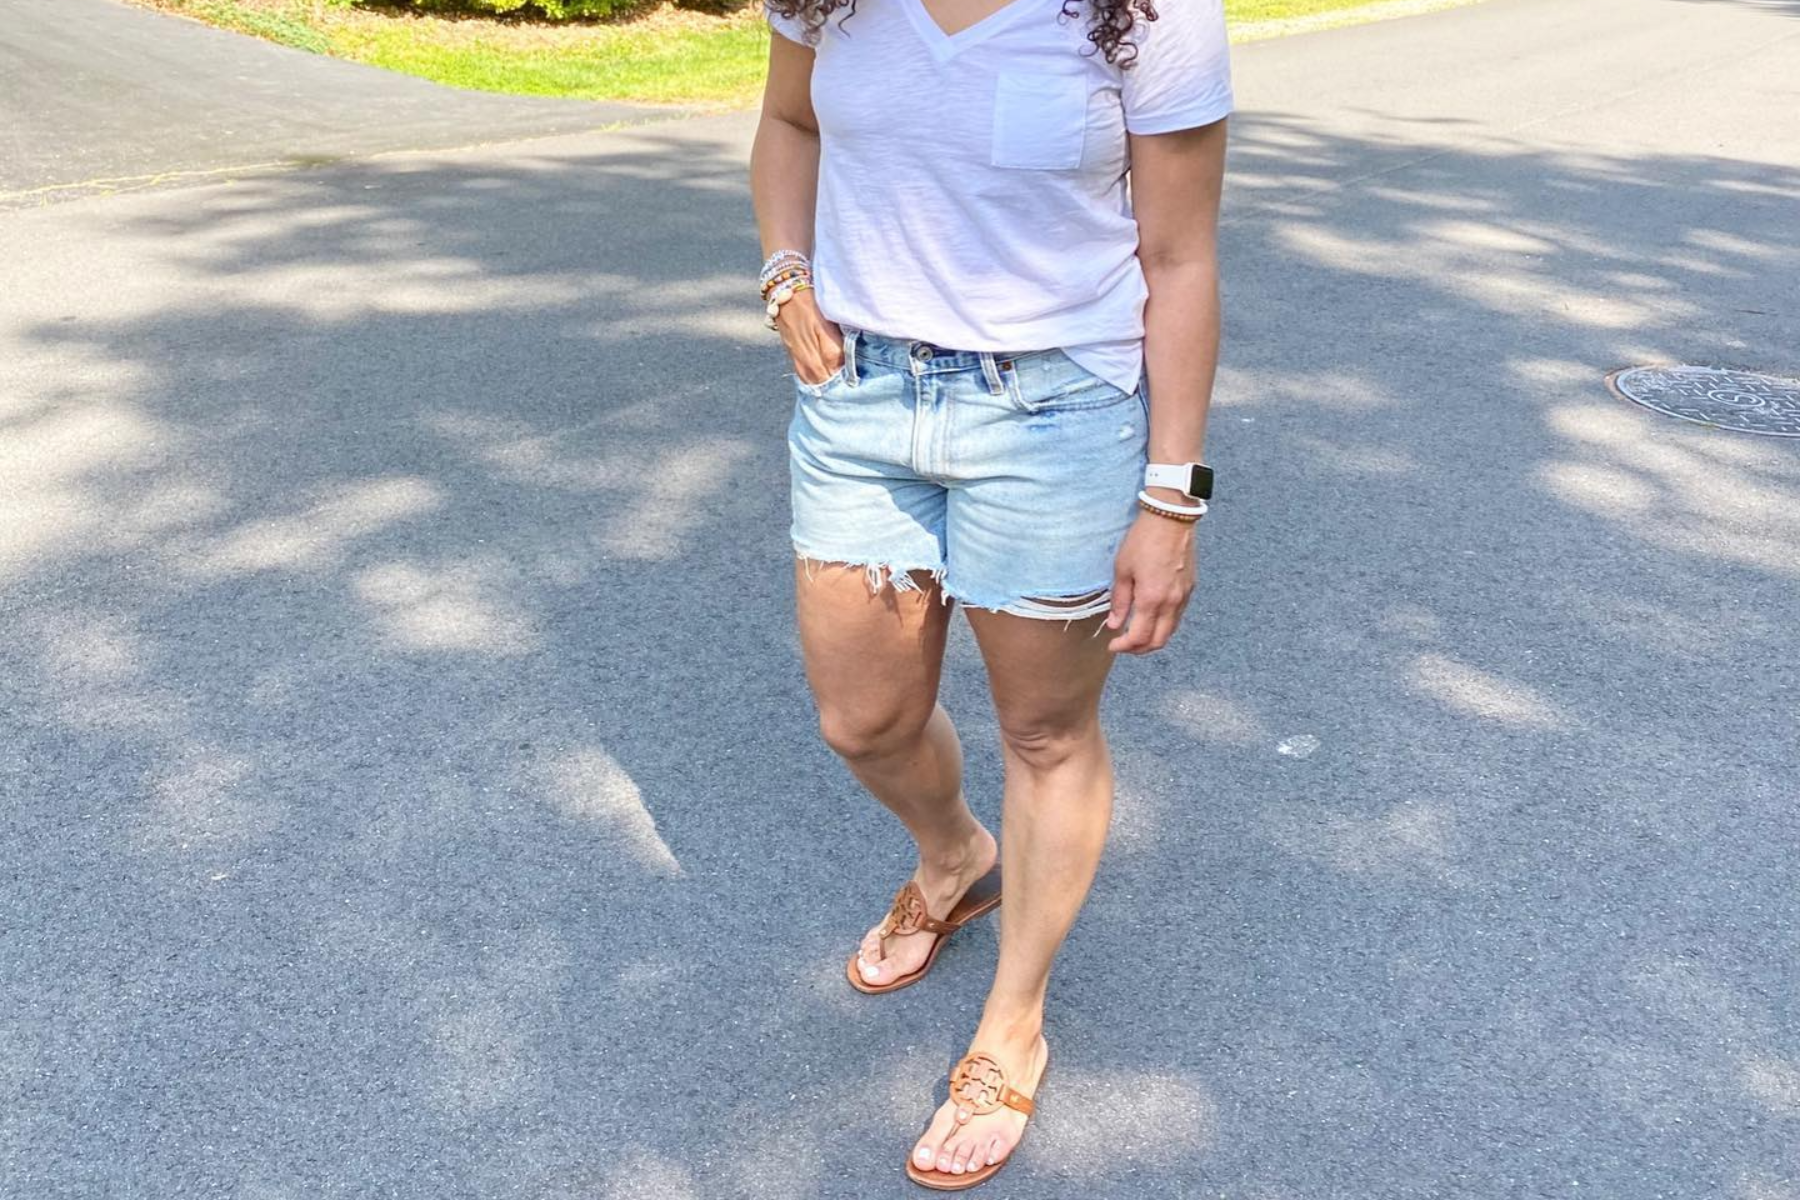 A lady is wearing a denim cutoff with a white t-shirt.